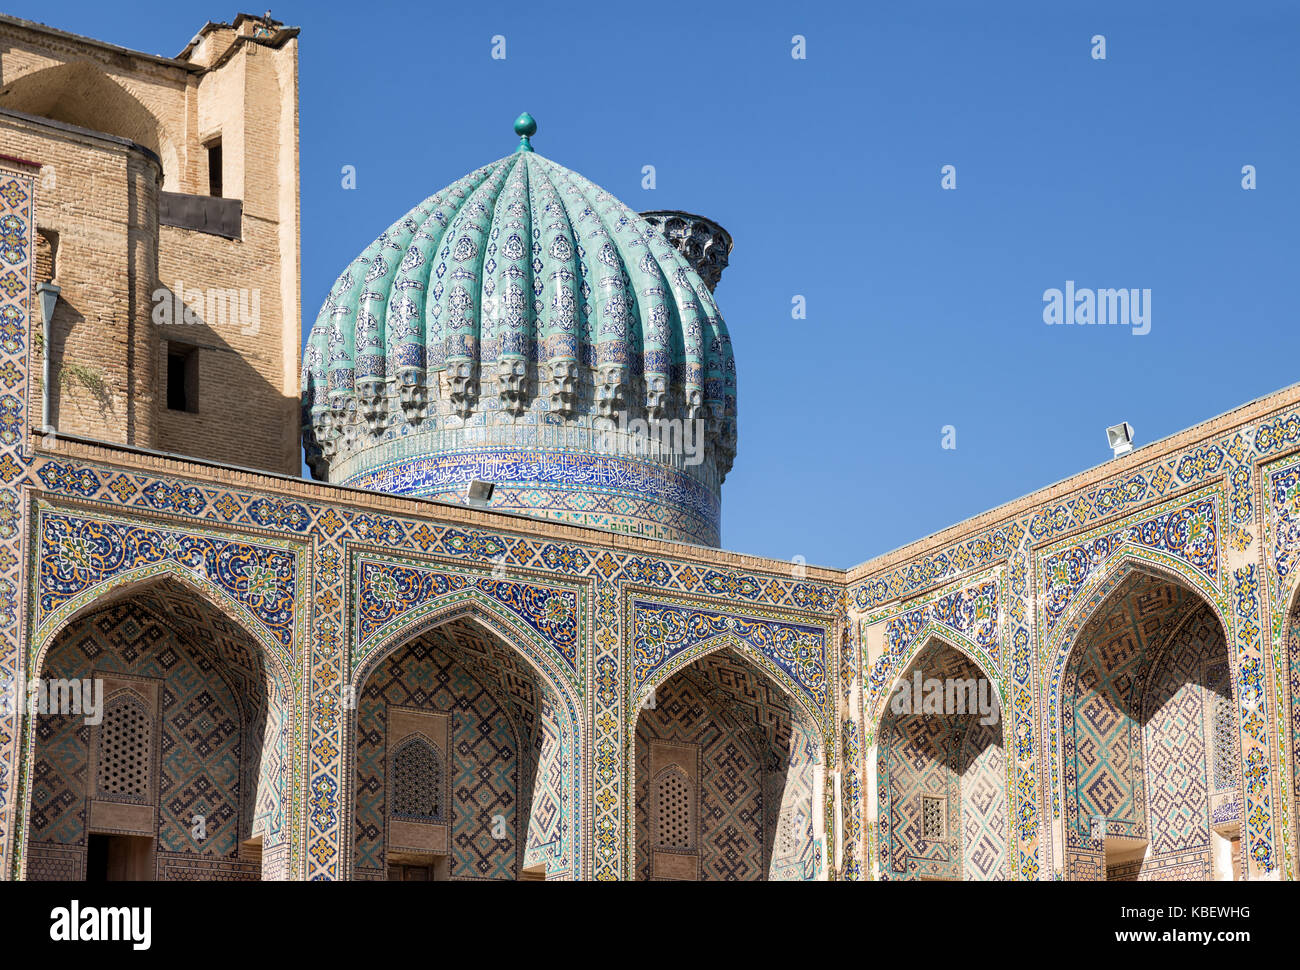 Dome and gallery on the second floor of Madrasah Sher-Dor courtyard. Samarkand, Uzbekistan Stock Photo